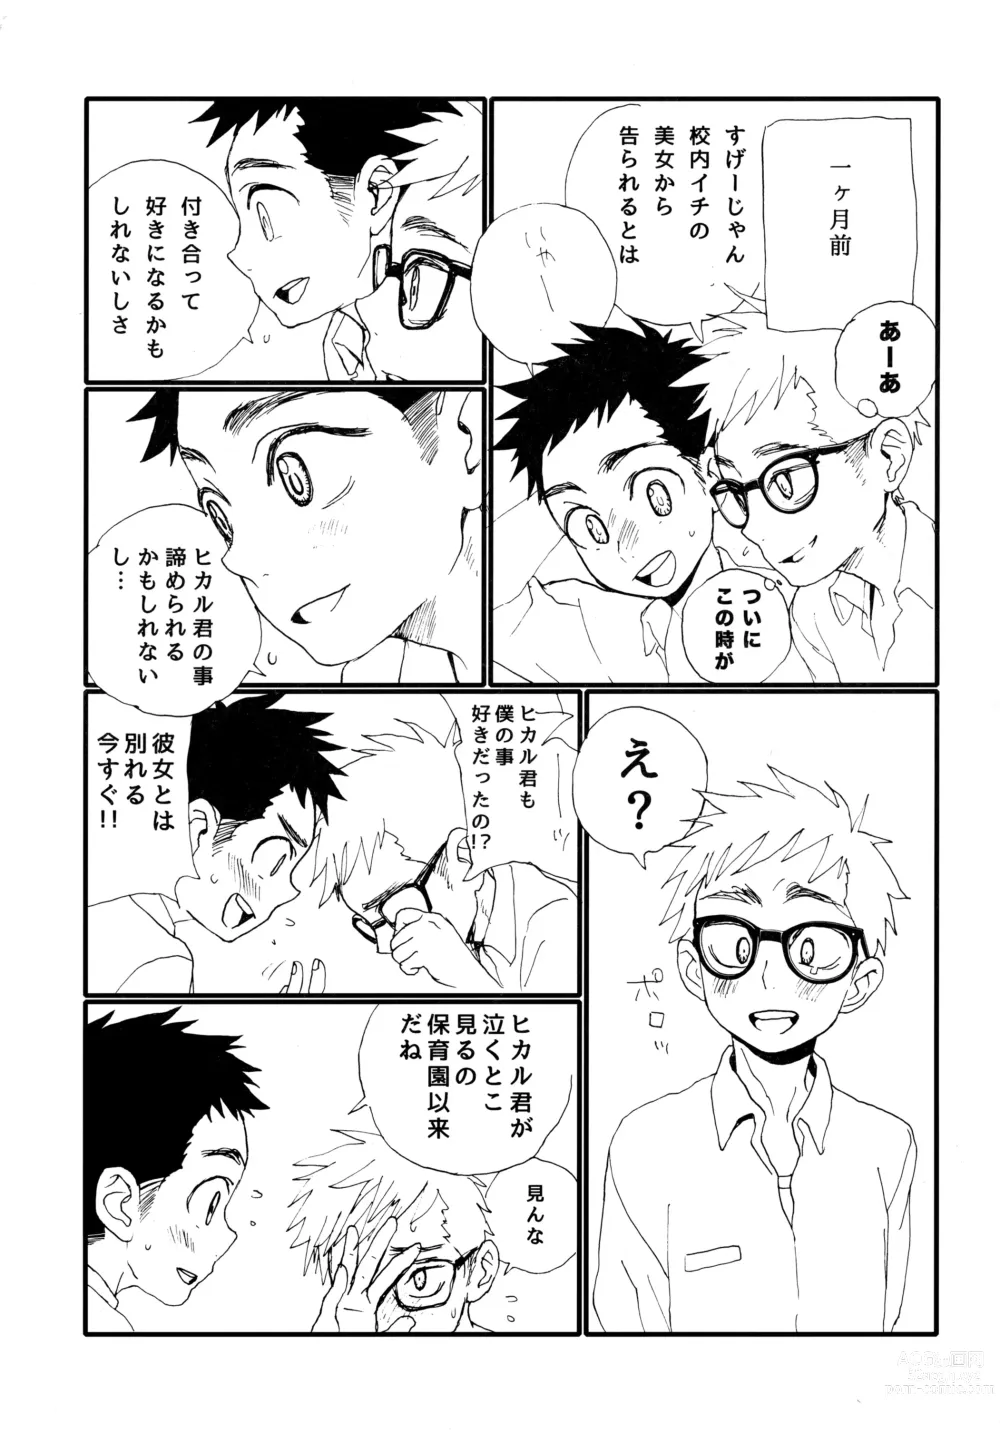 Page 36 of doujinshi Summertime・Blues